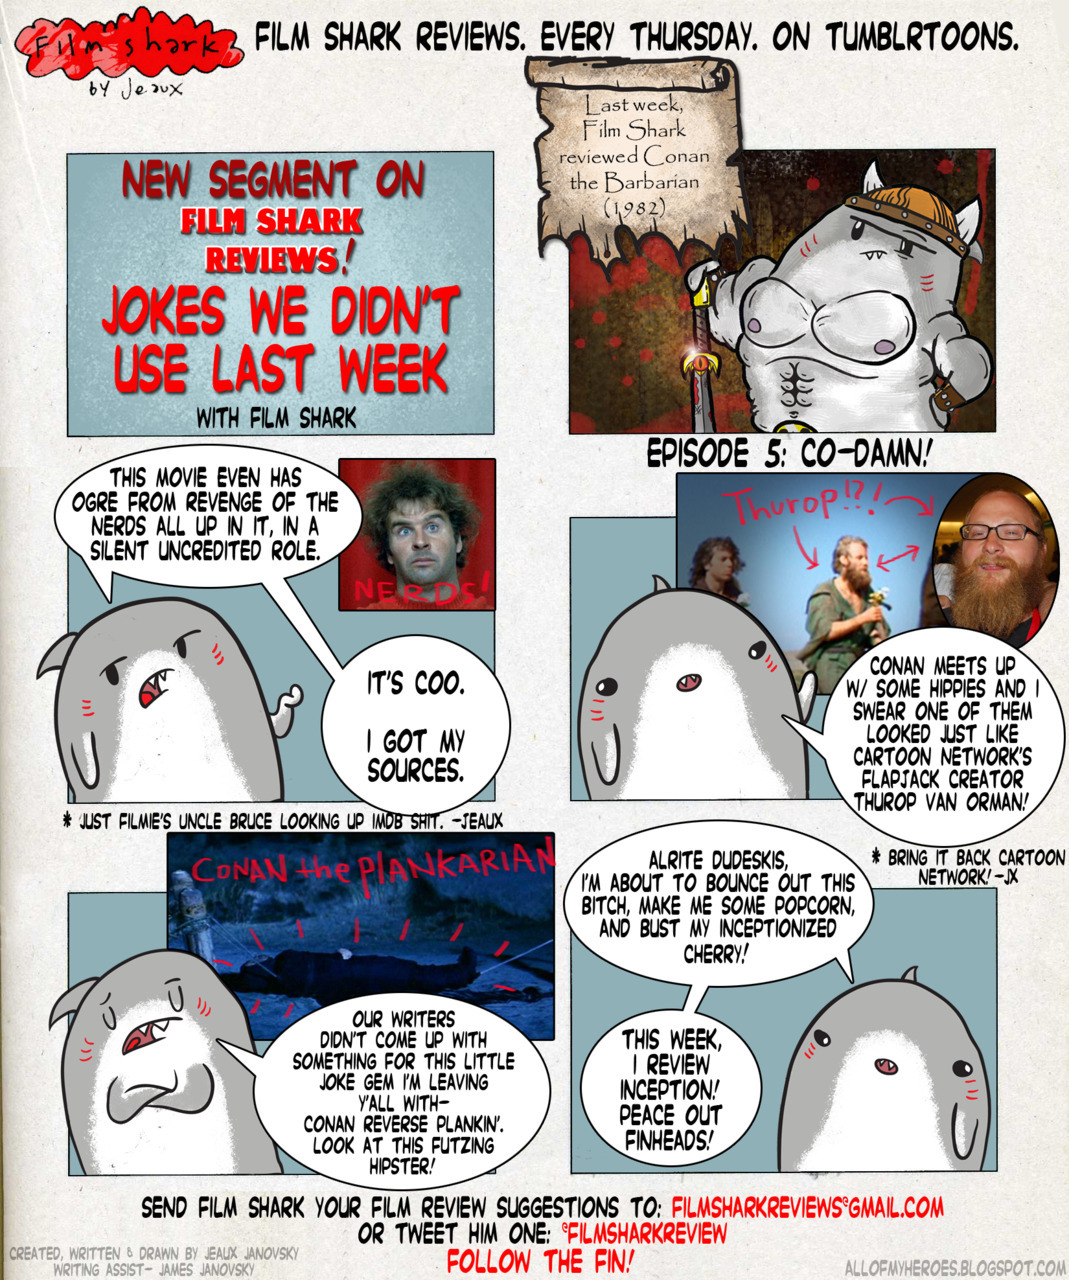 tumblrtoons: See it bigger at Tumblrtoons! Hey Finheads! Who wants an extra Film Shark comic? You? Good. Here’s a new segment we’ve been kicking around the Film Shark offices we like to call:Jokes We Didn’t Use Last Week with Film Shark! Aren’t you excited?!? Film Shark is! This segment isn’t gonna be every week, just if we have some leftover jokes lyin’ around for you guys from time to time. Get caught up on the past Film Shark Episodes! 00 Film Shark01 The Fin of Shark Week02 Sparkly Shark03 Limit Diss04 3D Penis05 Co-Damn! That not enough Filmie for you? Check Film Shark out in his animated debut on my buddy Jim’s Shark Night 3D movie review! Starring actor/comedian (&amp; friend) Whit Hertford as Film Shark! Filmie and the Film Shark Team would appreciate more views and comments, so please take some time to do so and tell a friend! Still not enough? Follow Film Shark today on his very own Tumblr: filmshark! And the usual: Follow the Fin! Suggest a Film Review Suggestion for Film Shark! He wants to know what movies he should put up on his Fin-Flix queue! Are you psyched for this week’s review? This week: Inception! Have you seen the super sneak peek at the Episode 6 Inception titlecard yet? BAM! (Don’t say we don’t do anything for you!) Eat Popcorn, Not People! -Jeaux Janovsky 